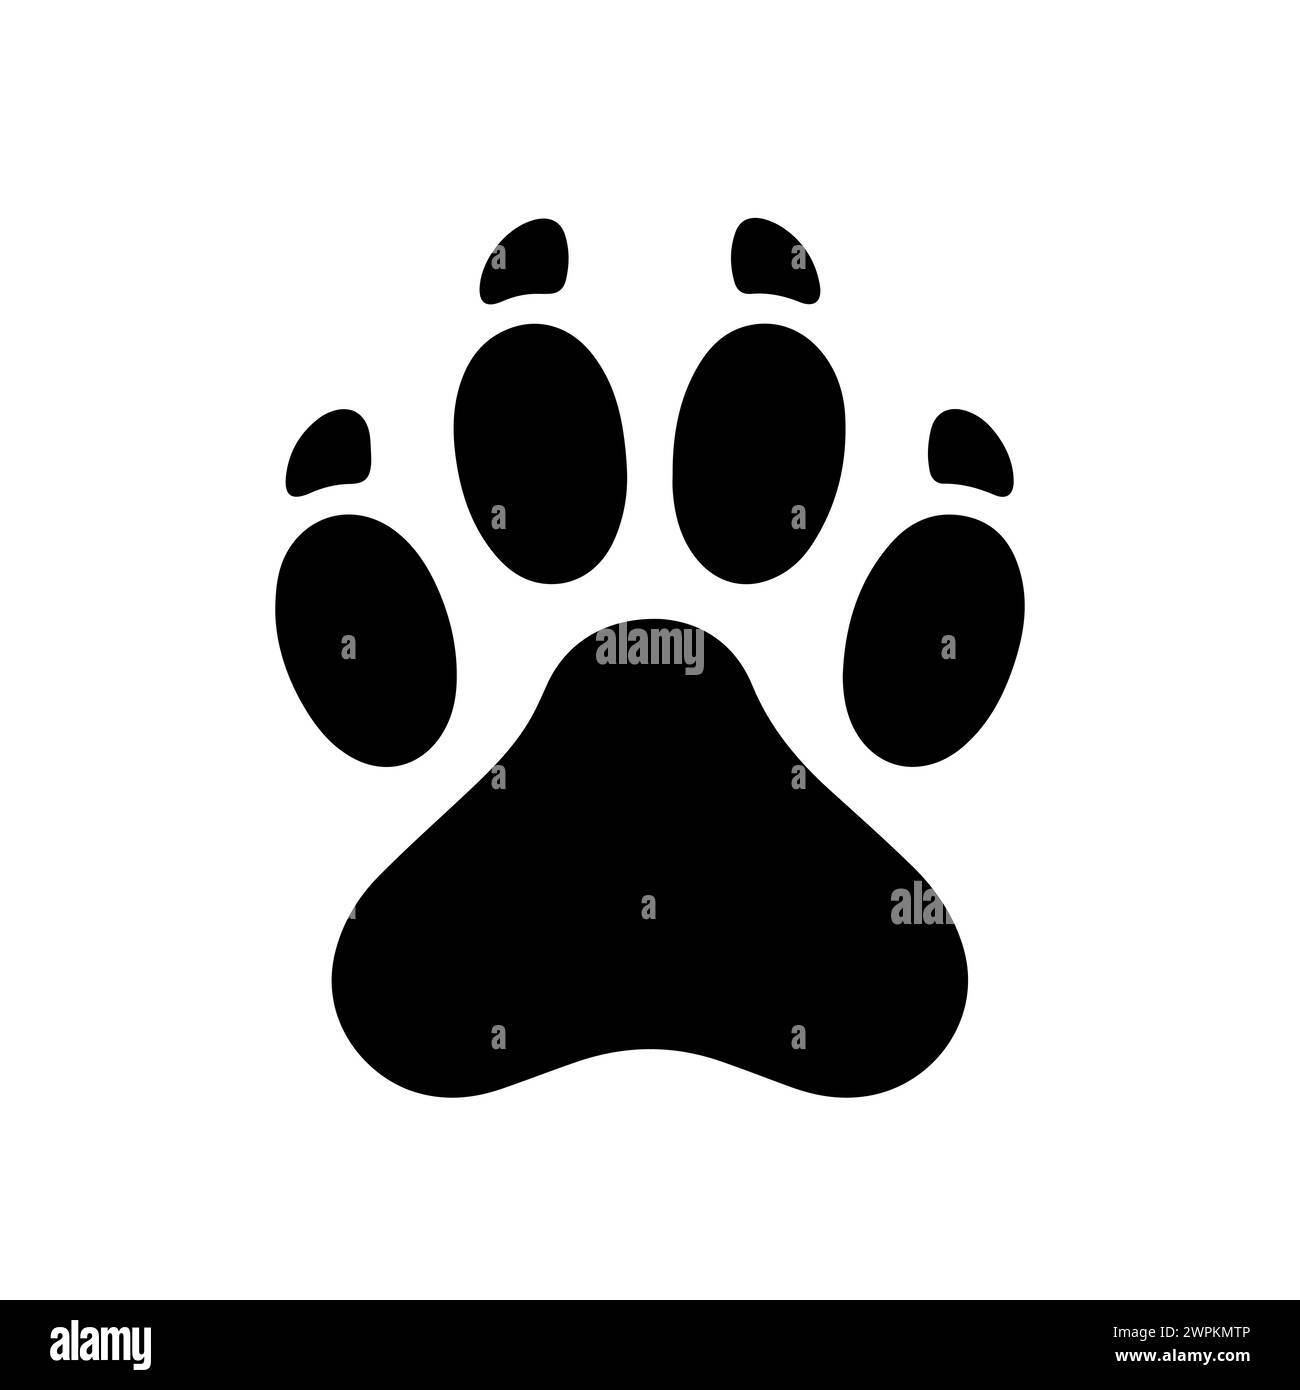 Paw print icon. Dog or cat paw print icon in flat design. Stock Vector